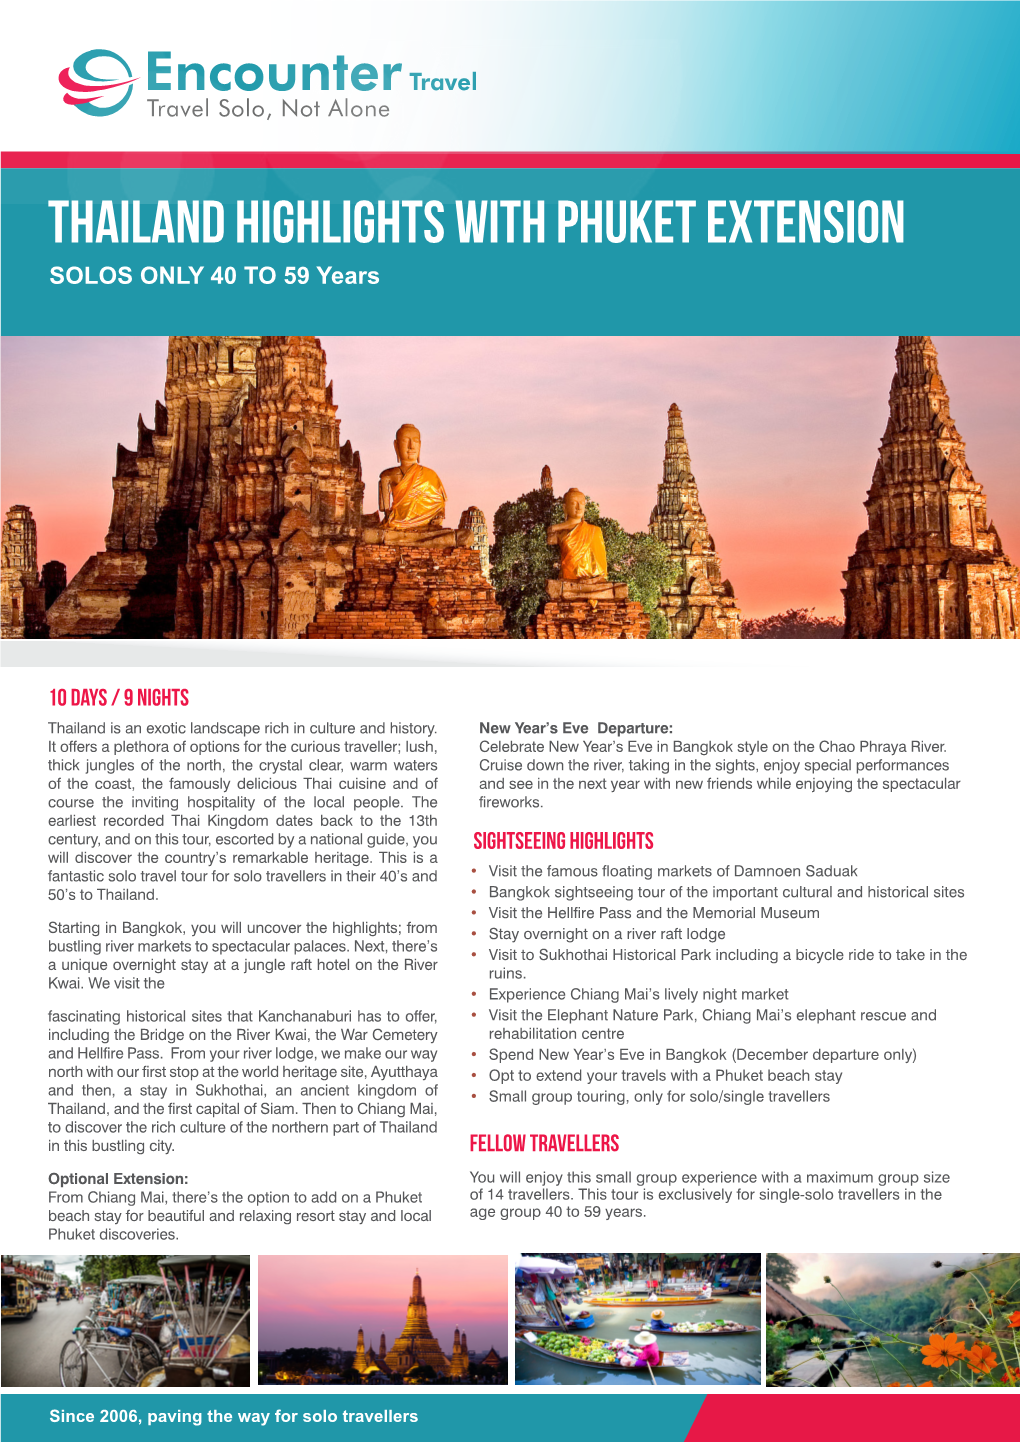 THAILAND HIGHLIGHTS with PHUKET EXTENSION SOLOS ONLY 40 to 59 Years